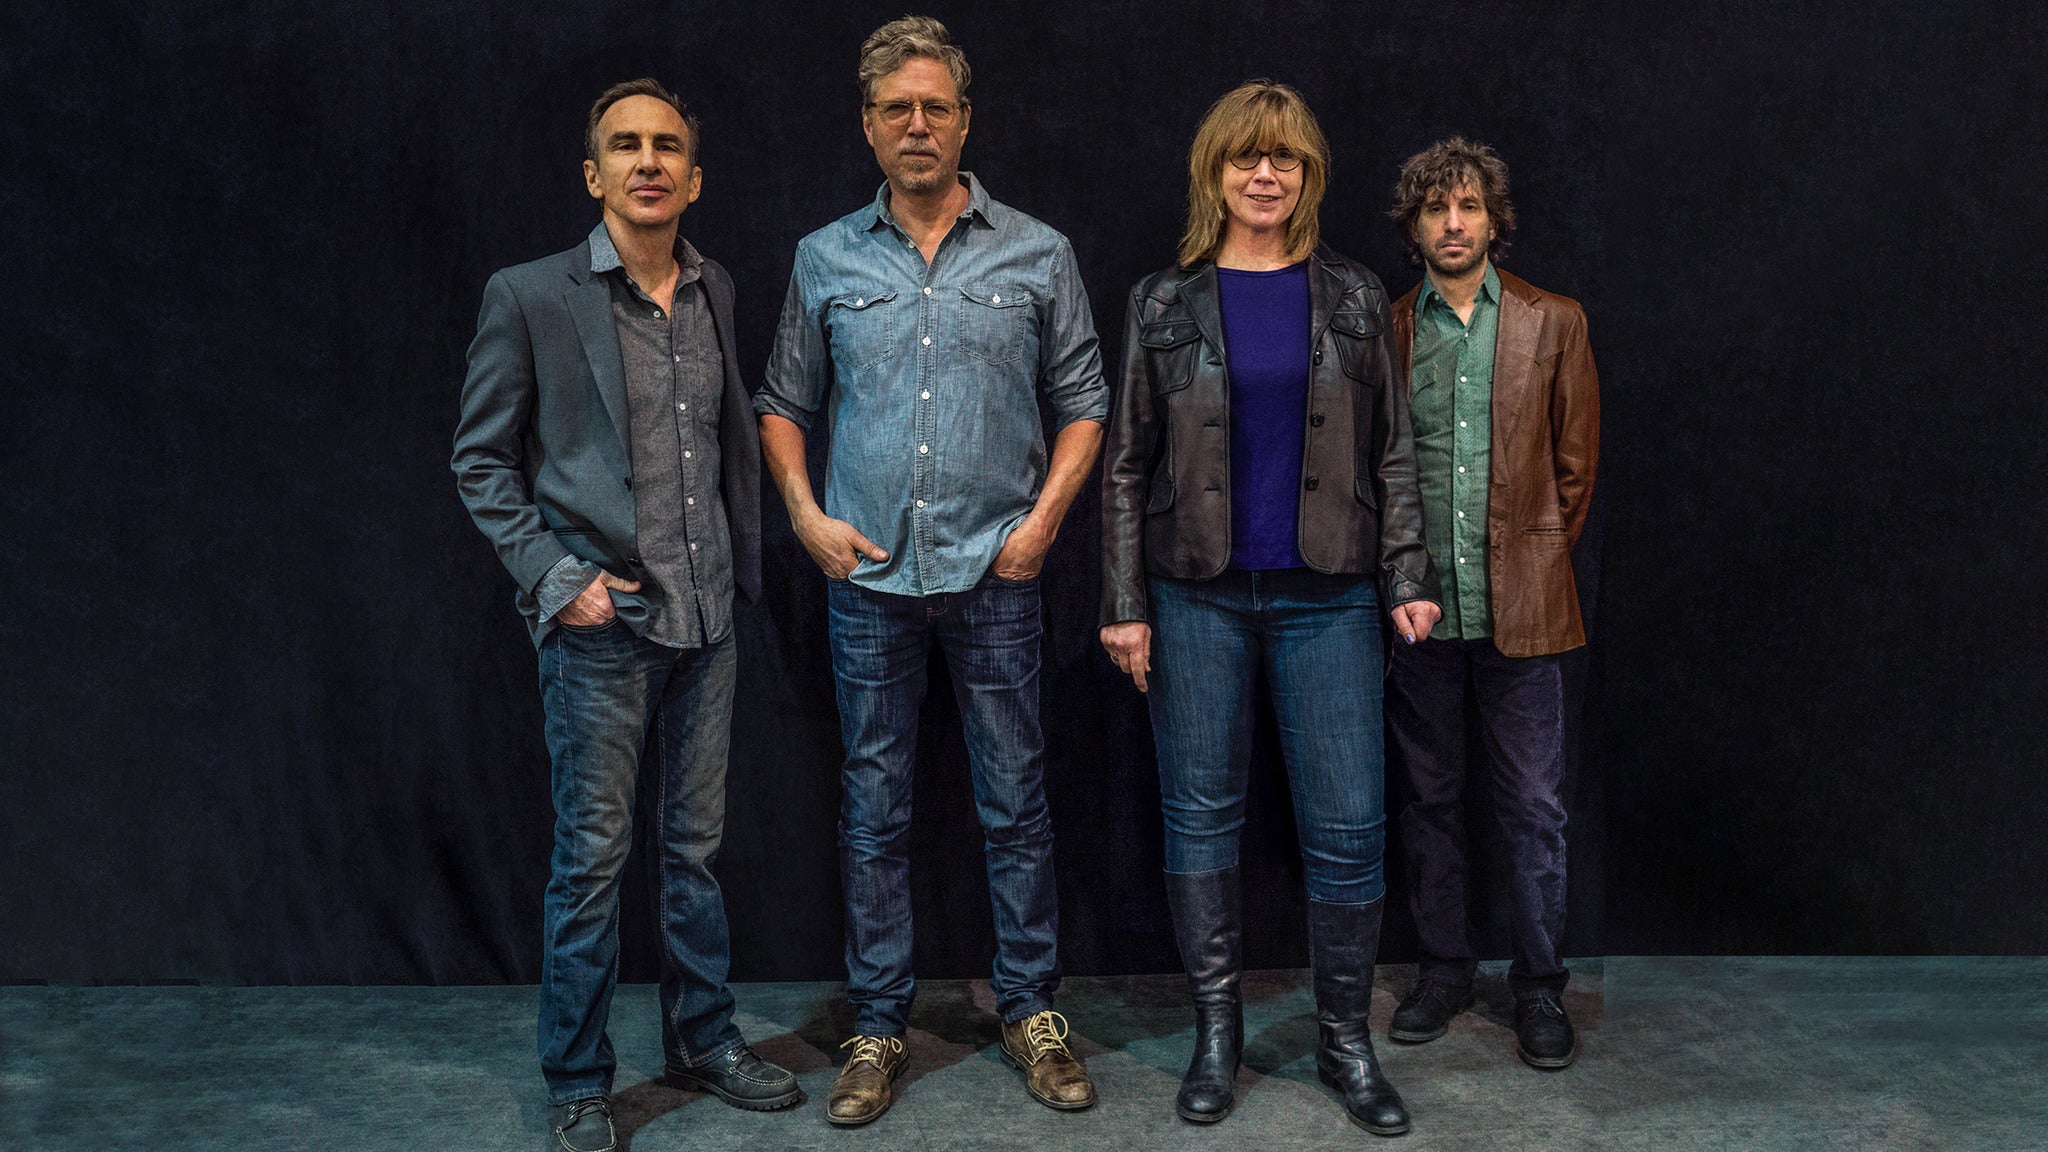 The Jayhawks in New York promo photo for Live Nation presale offer code